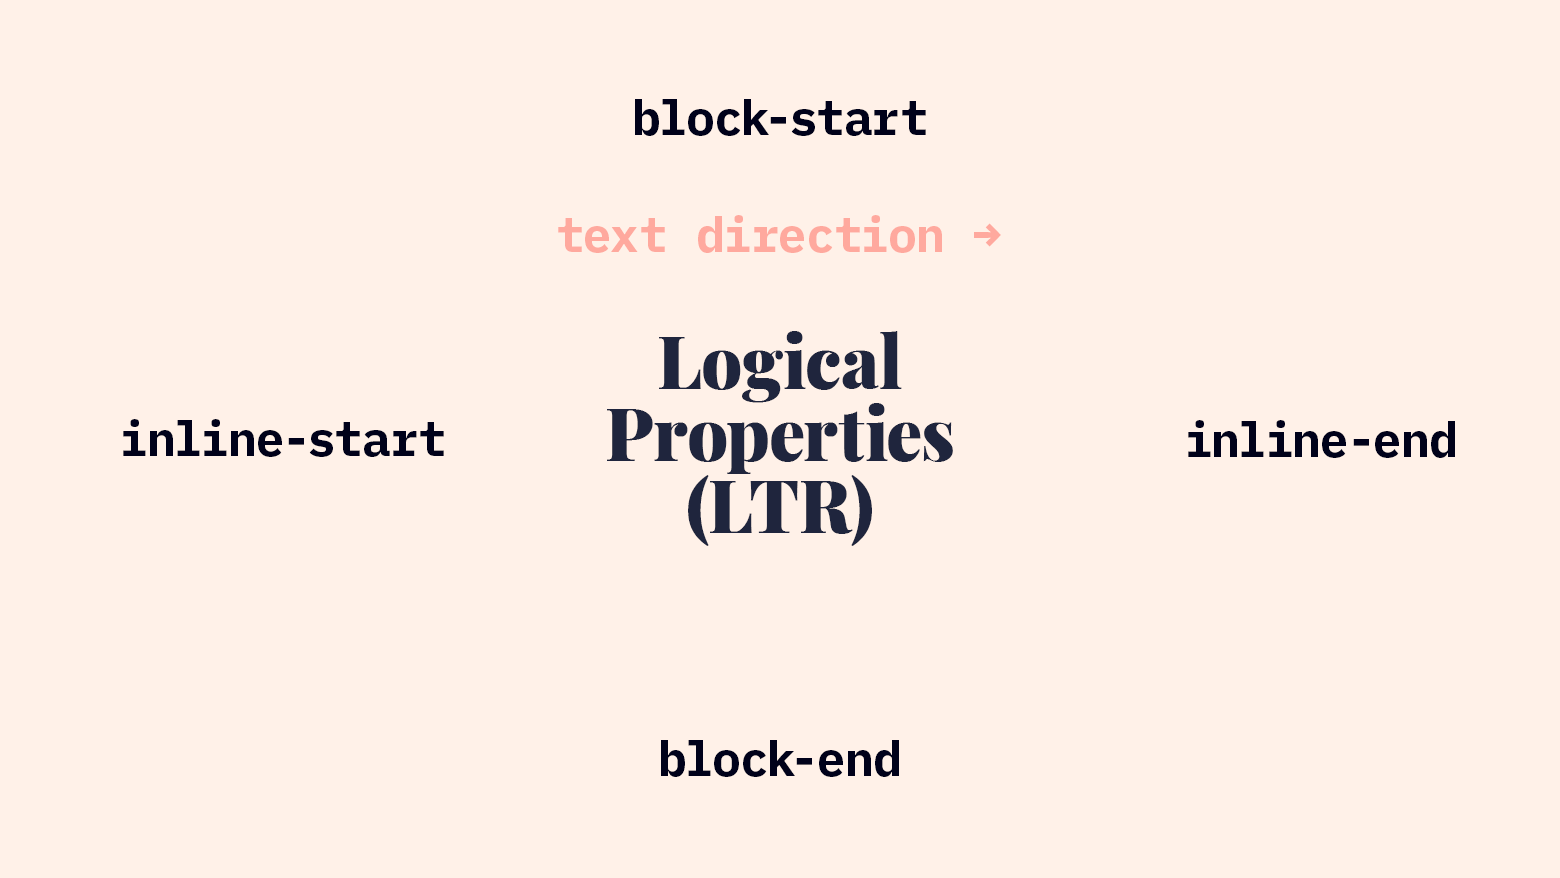 Logical Properties in LTR Writing Mode